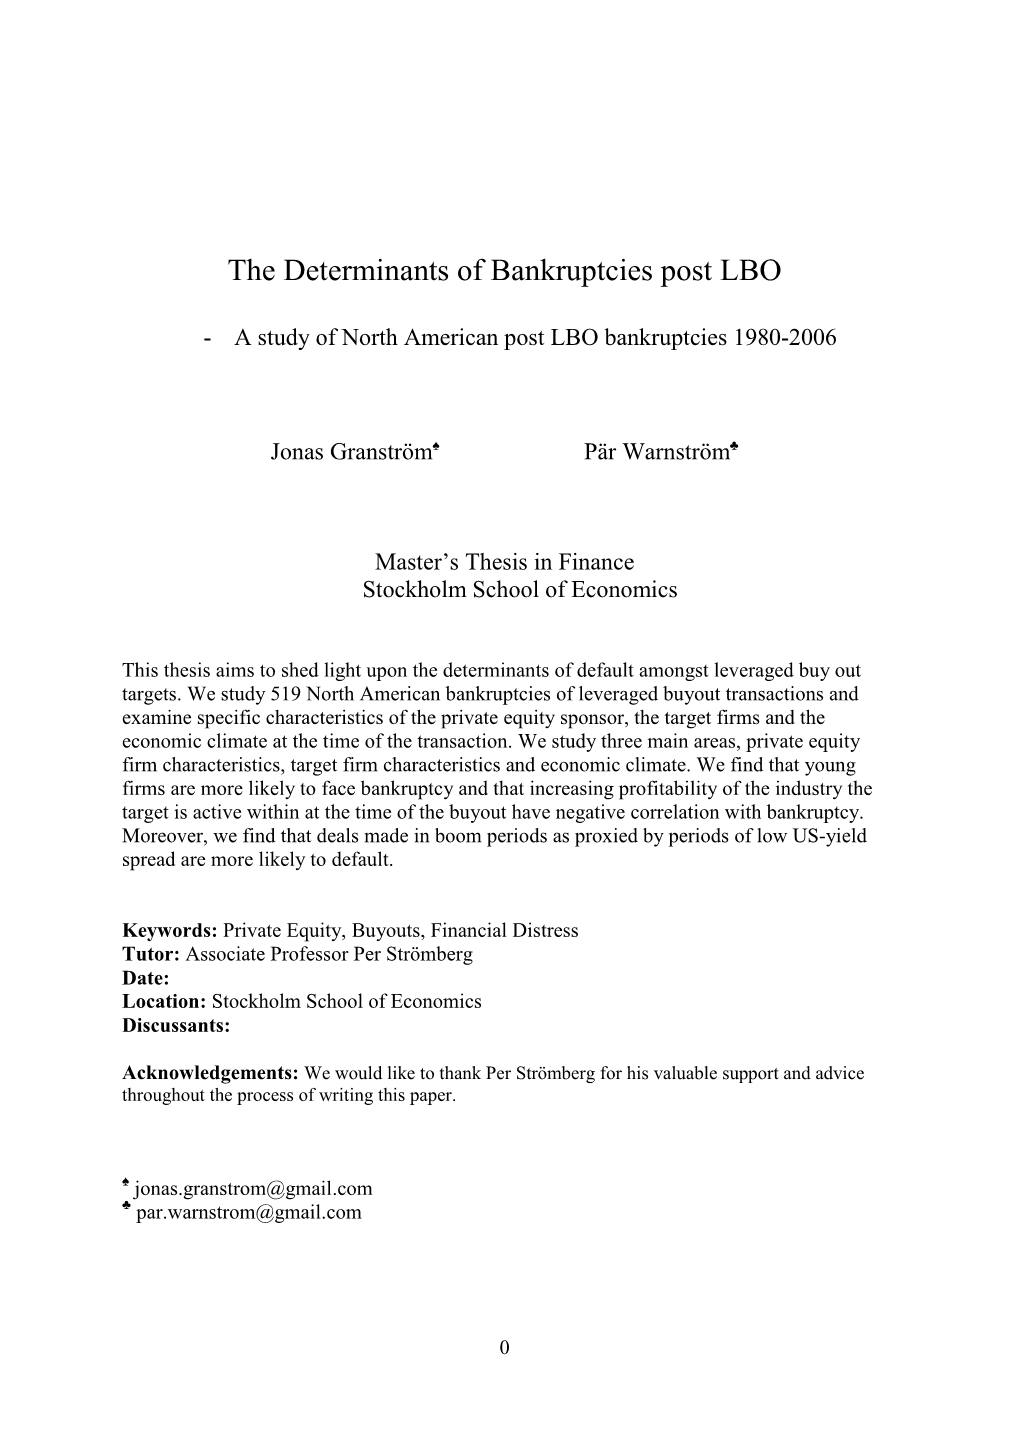 The Determinants of Bankruptcies Post LBO, Master Thesis, Jonas